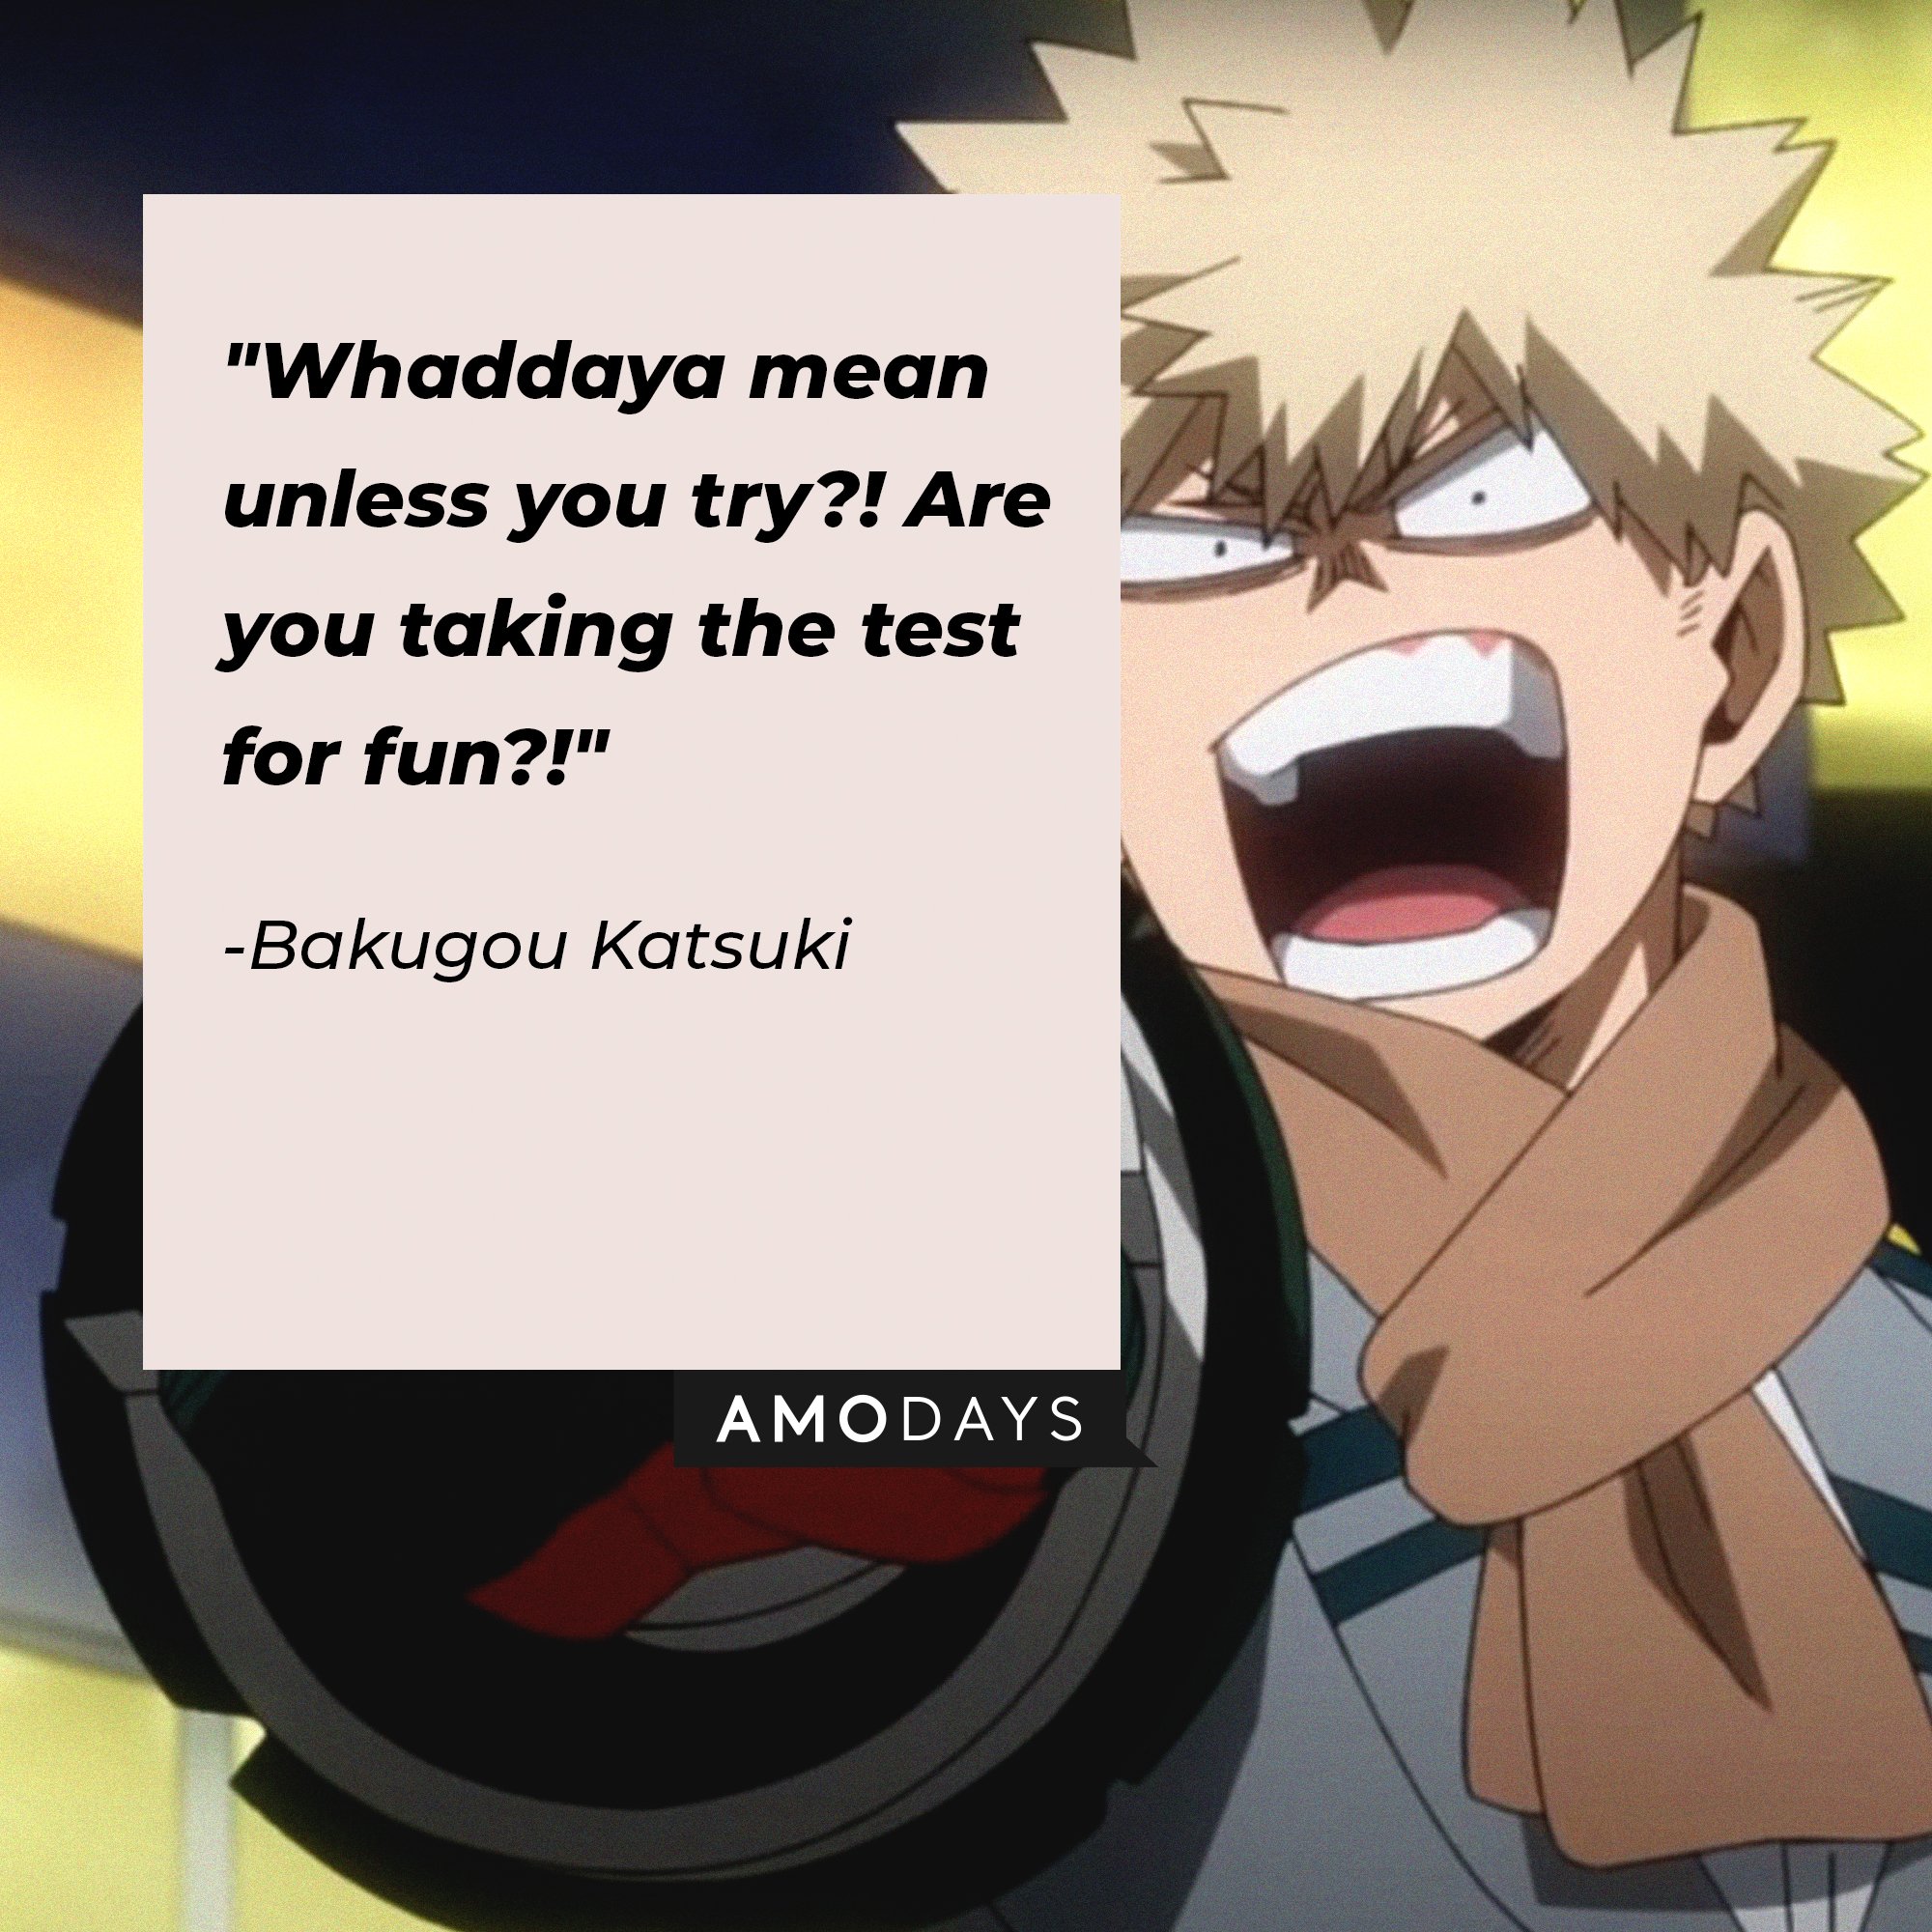 Bakugou Katsuki’s quote: "Whaddaya mean unless you try?! Are you taking the test for fun?!" | Image: AmoDays